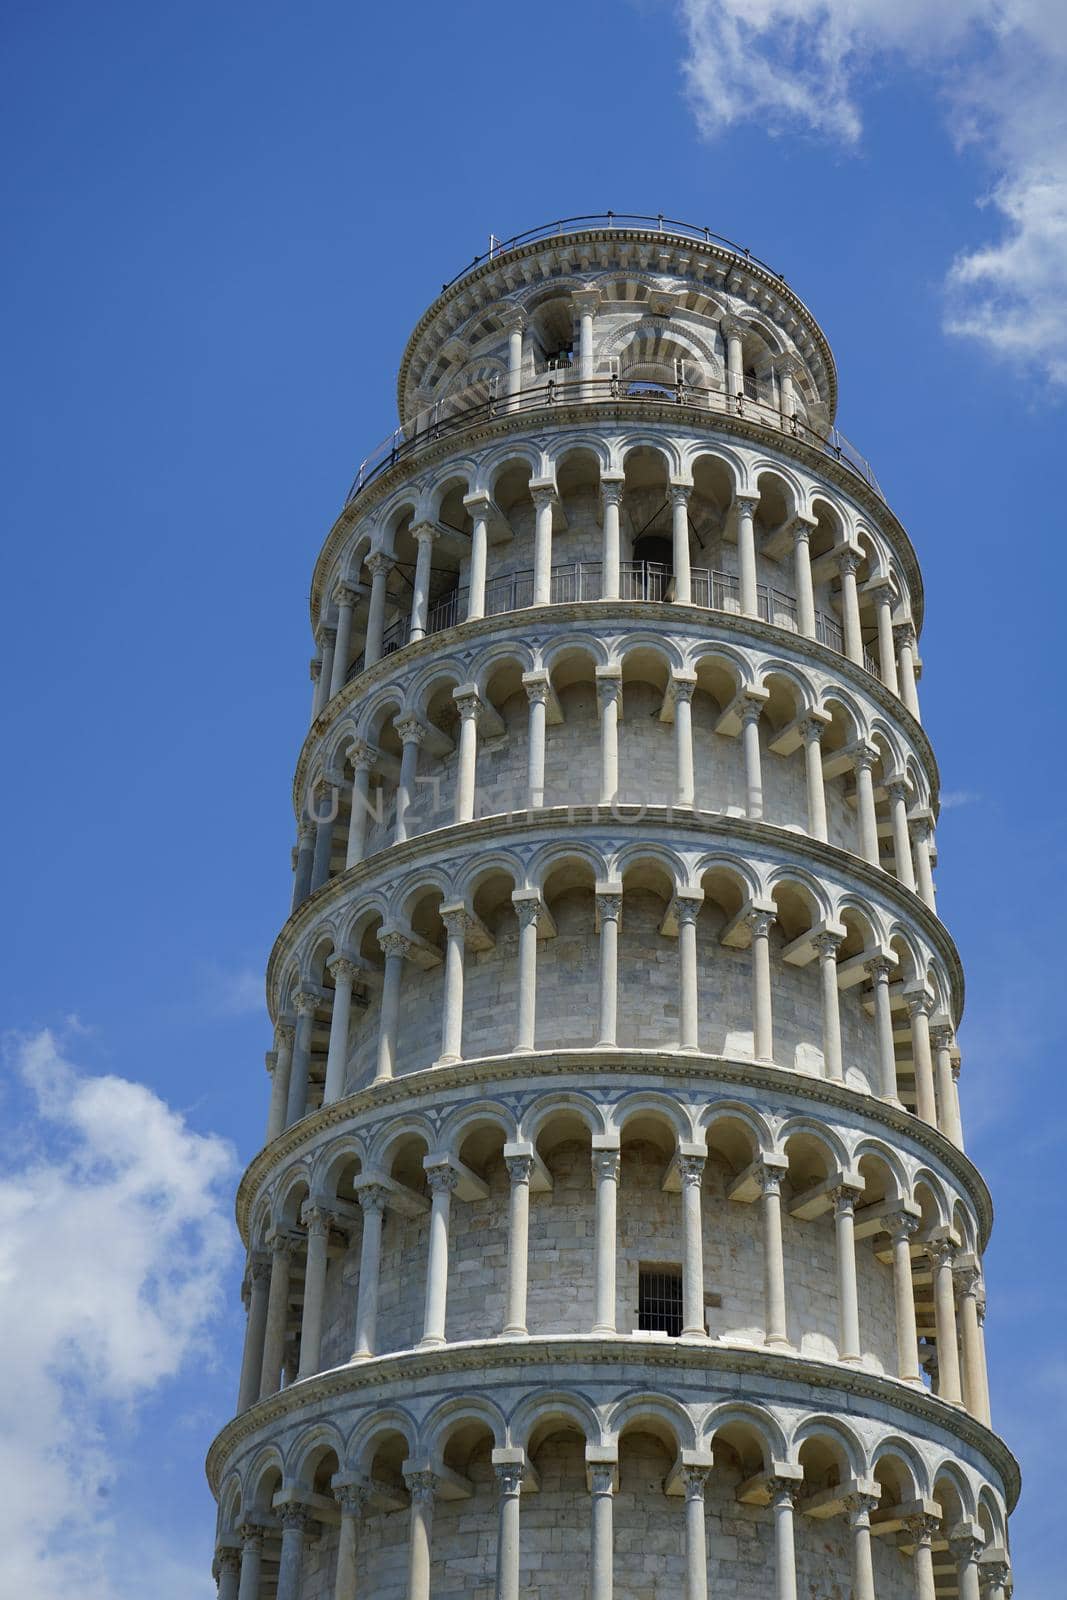 The leaning tower of Pisa, Tuscany - Italy by cosca